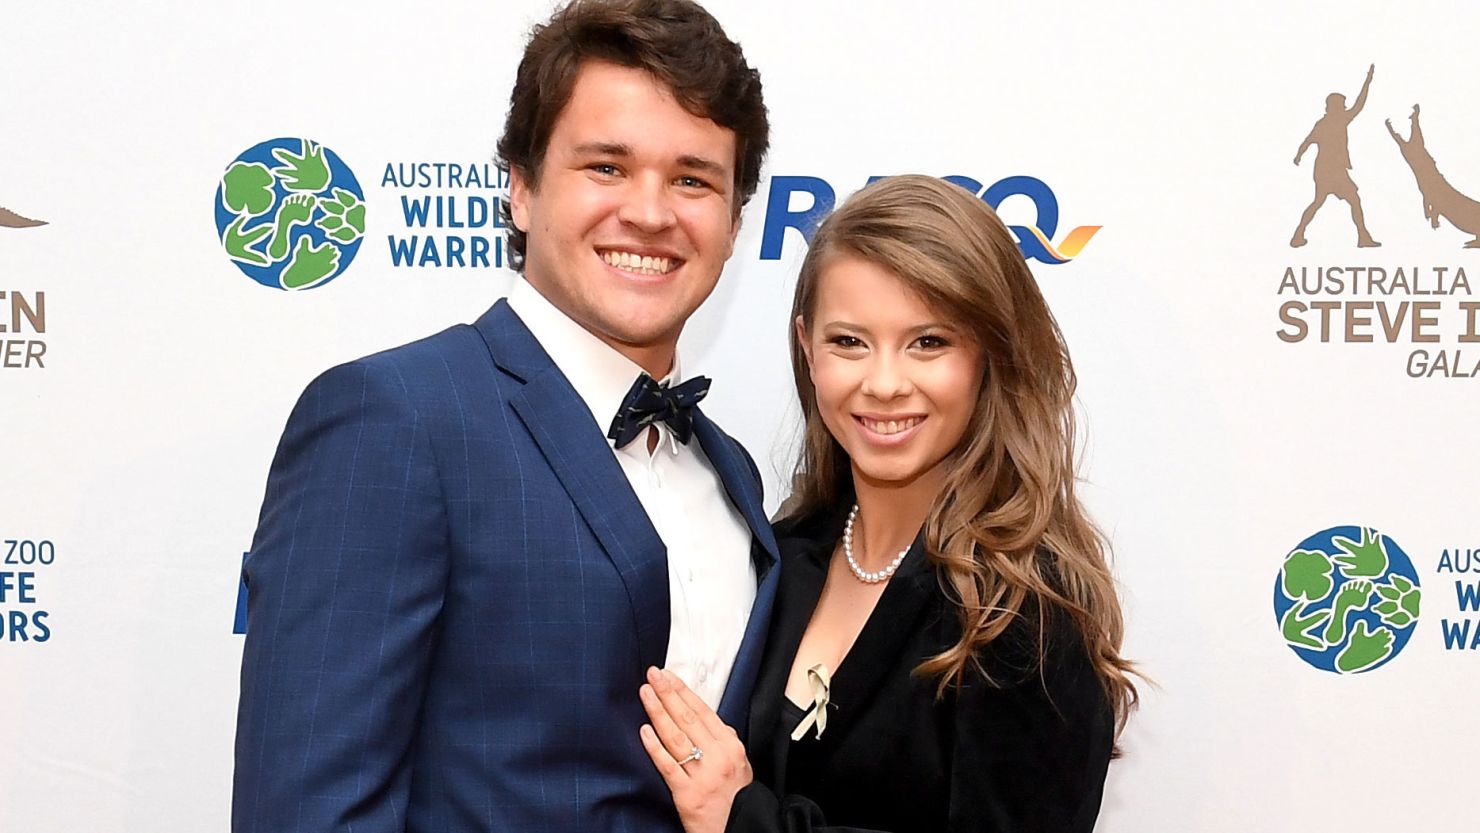 BRISBANE, AUSTRALIA - NOVEMBER 09: Bindi Irwin poses for a photo with fiance Chandler Powell at the annual Steve Irwin Gala Dinner at Brisbane Convention & Exhibition Centre on November 09, 2019 in Brisbane, Australia. (Photo by Bradley Kanaris/Getty Images)